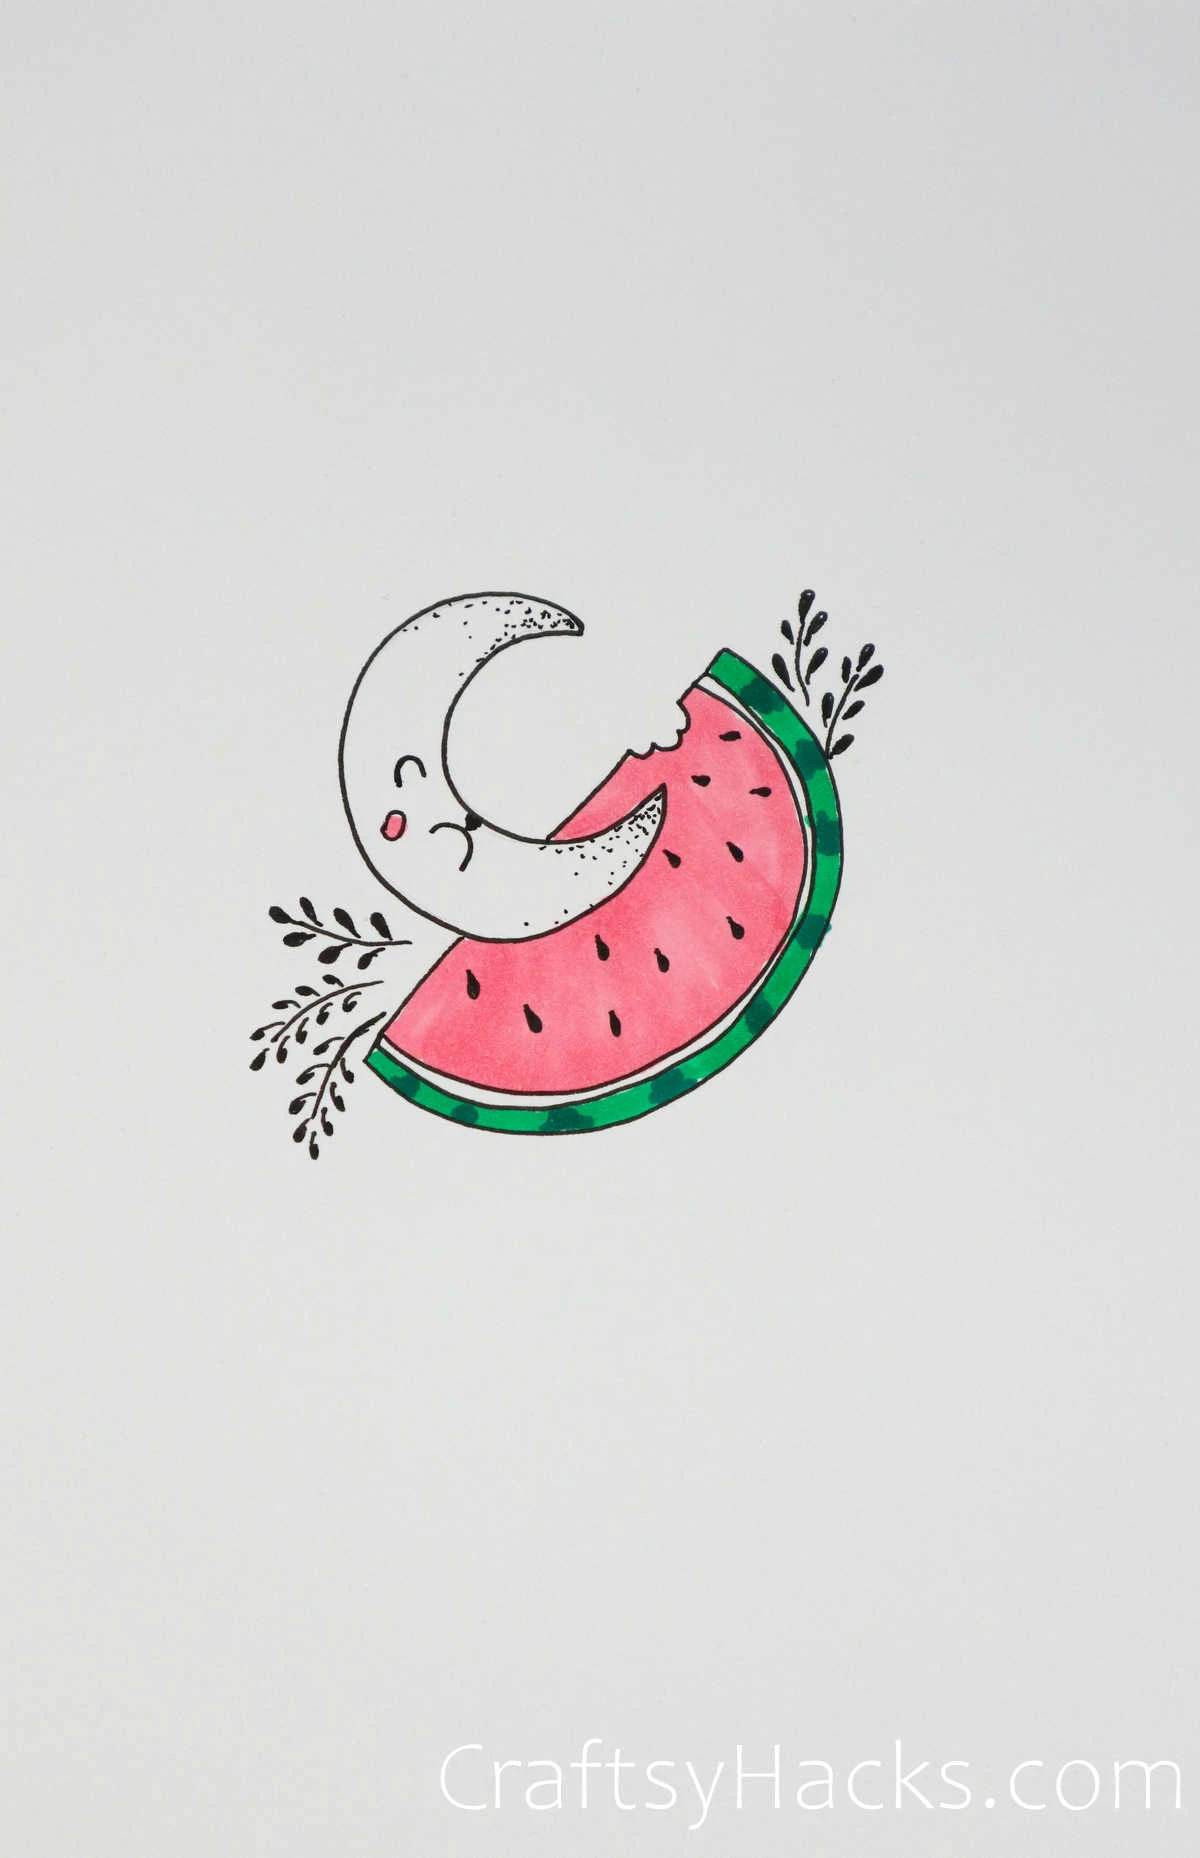 the moon and the watermelon